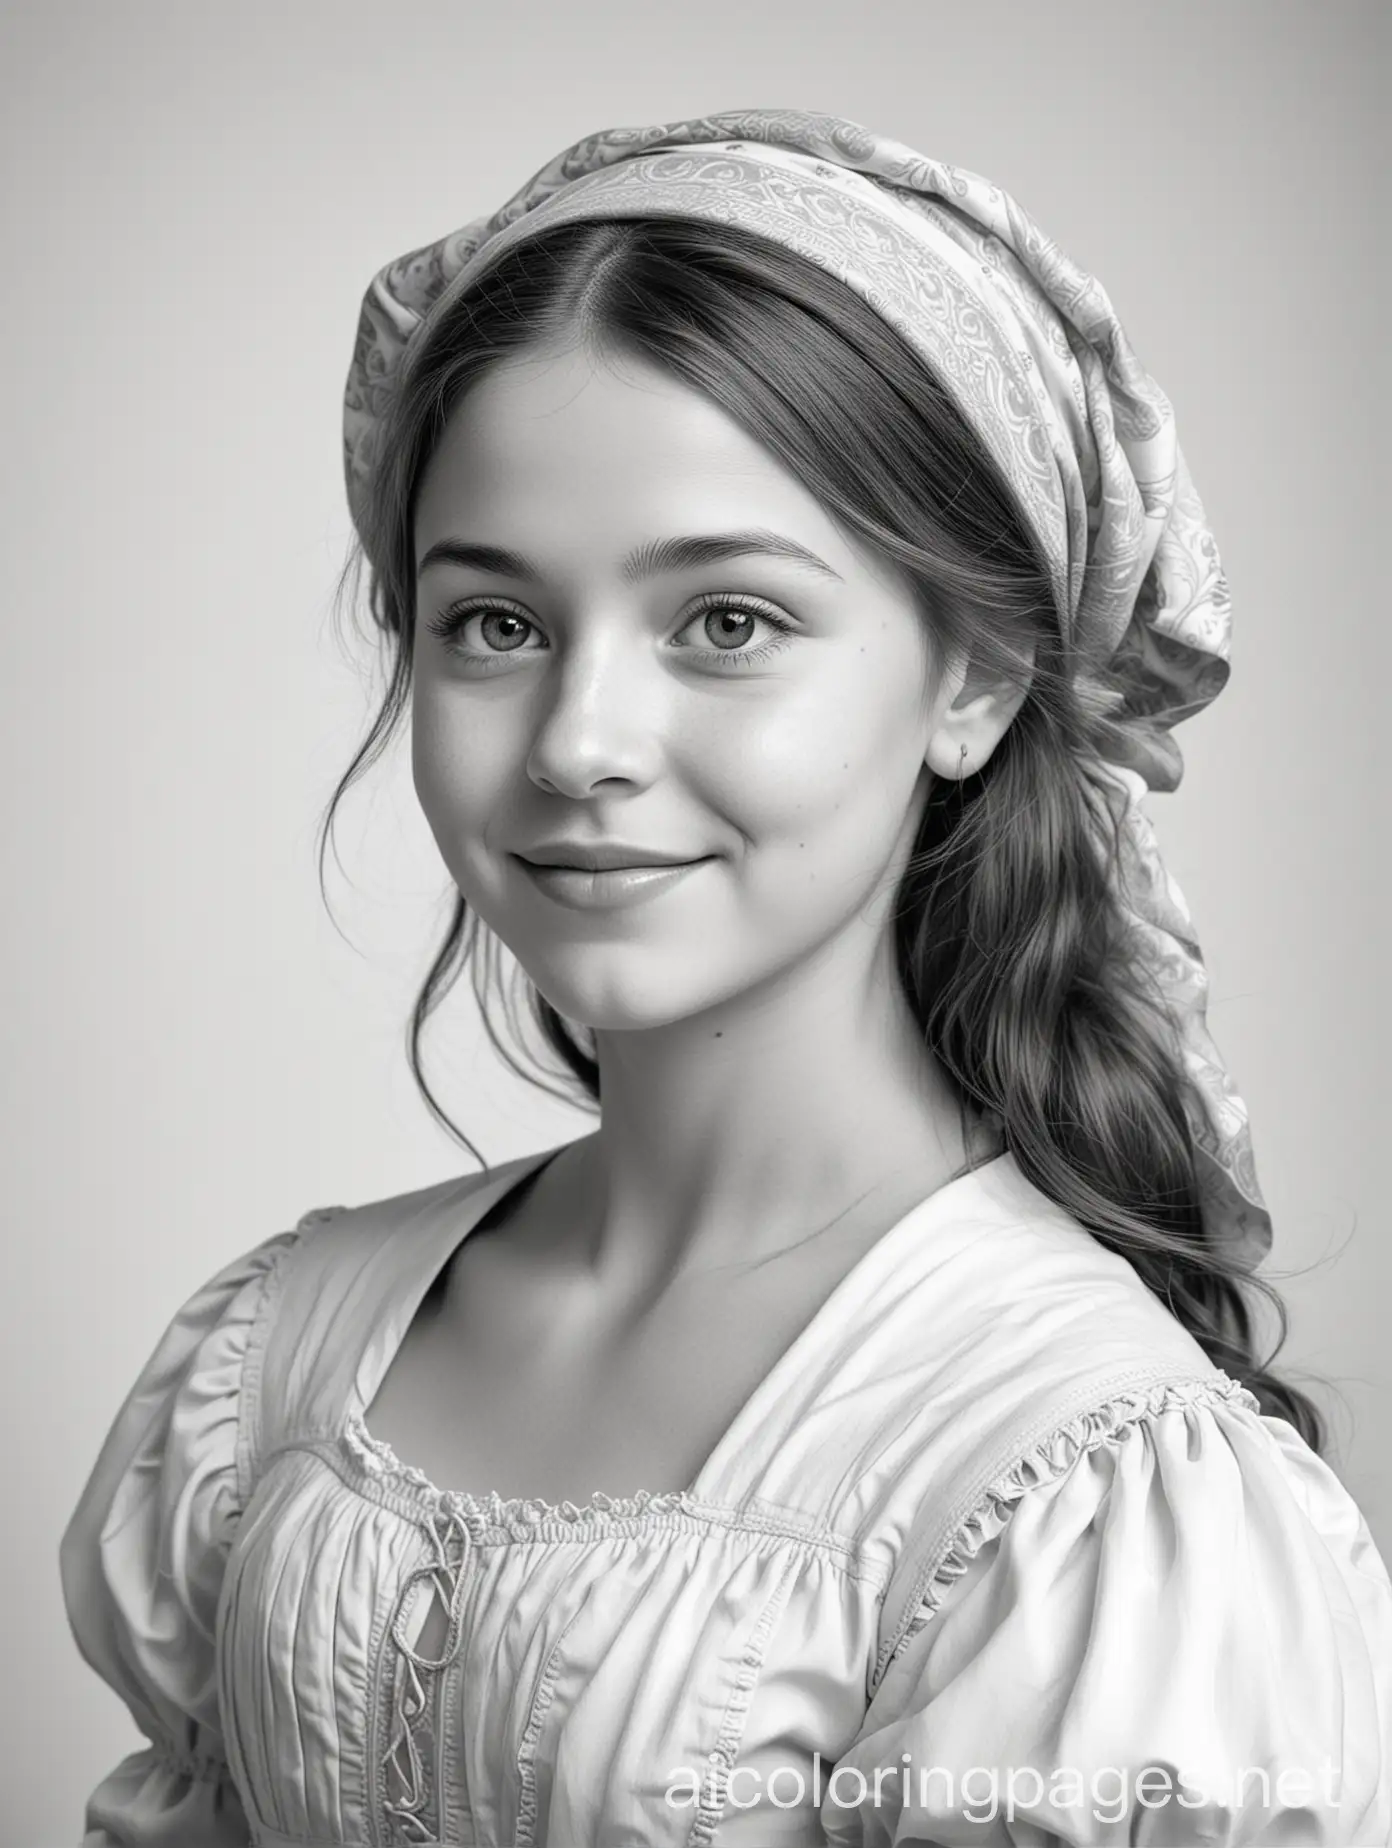 Portrait of a mischievous renaissance peasant girl amidst familiar domestic surroundings, Coloring Page, black and white, line art, white background, Simplicity, Ample White Space. The background of the coloring page is plain white to make it easy for young children to color within the lines. The outlines of all the subjects are easy to distinguish, making it simple for kids to color without too much difficulty